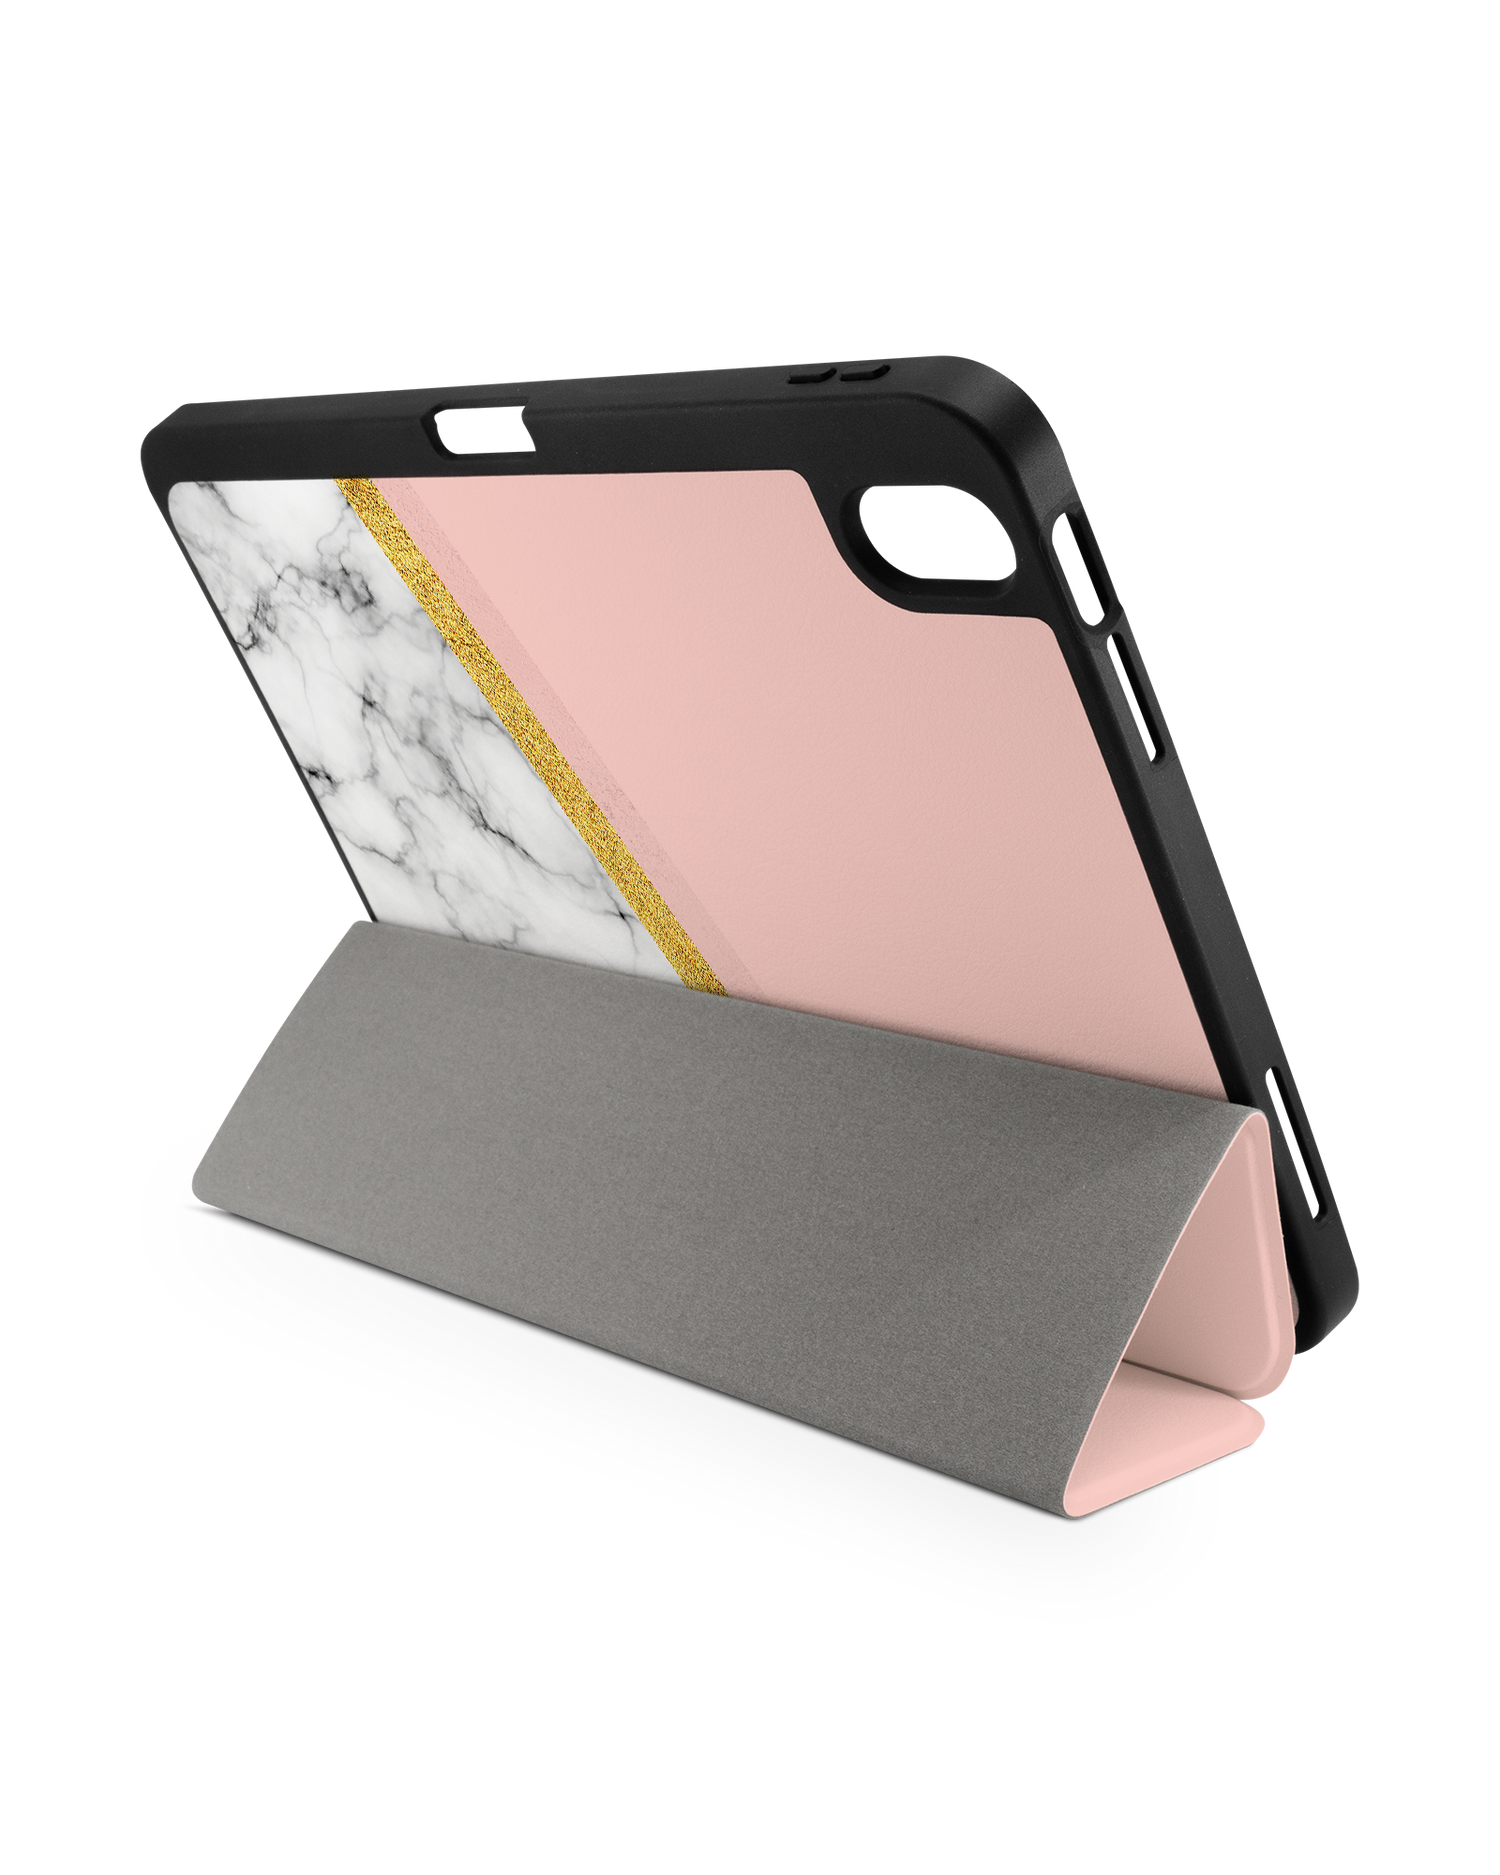 Marble Slice iPad Case with Pencil Holder for Apple iPad (10th Generation): Set up in landscape format (back view)